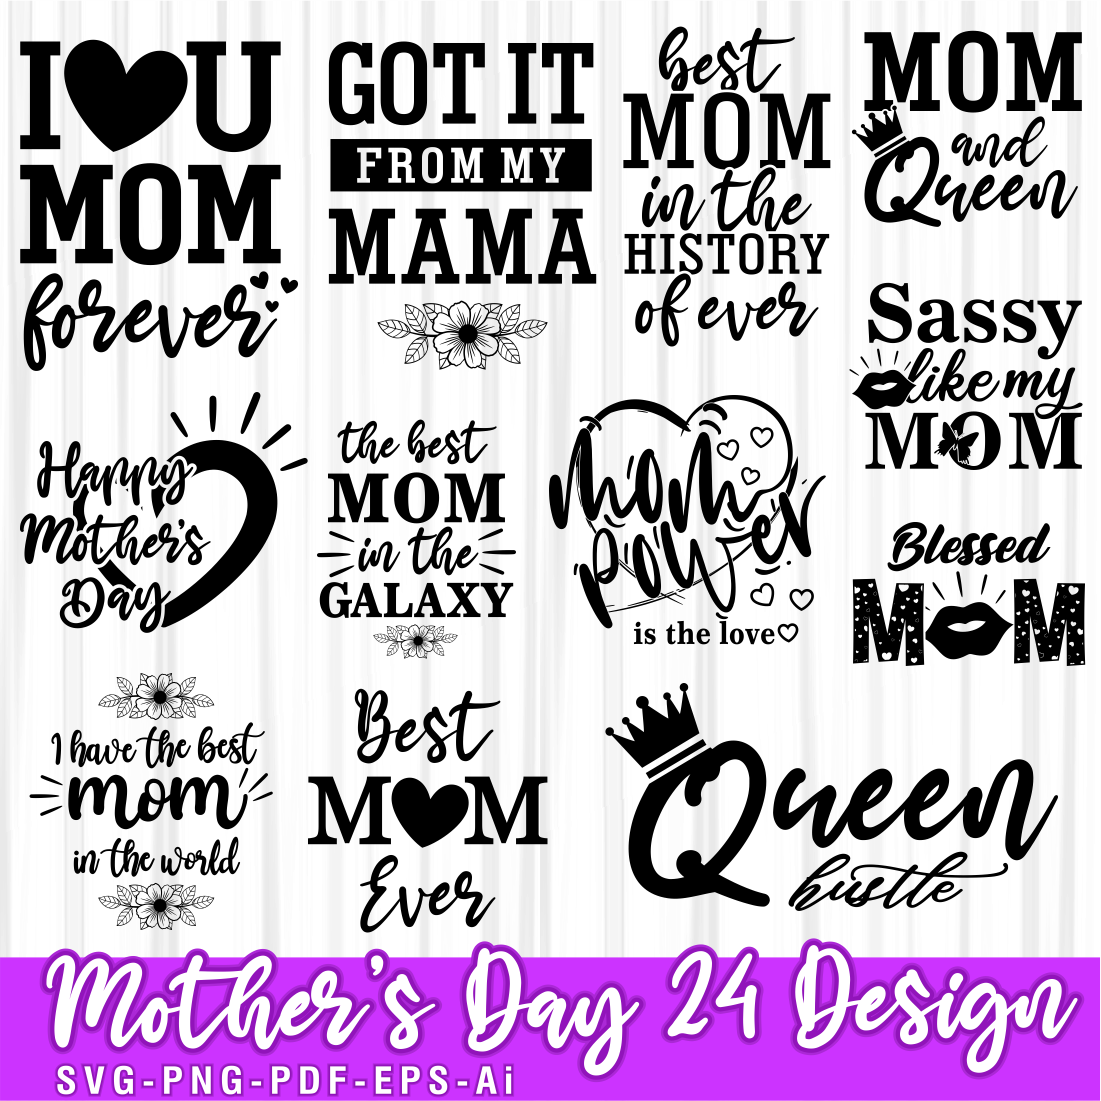 Mother's Day Inspirational & Motivational Quotes SVG T shirt Design Vector Bundle, Mothers Day SVG Bundle, Funny Mom Life Quotes SVG Bundle, Mothers Day Quote Vector Designs, Women's Day preview image.